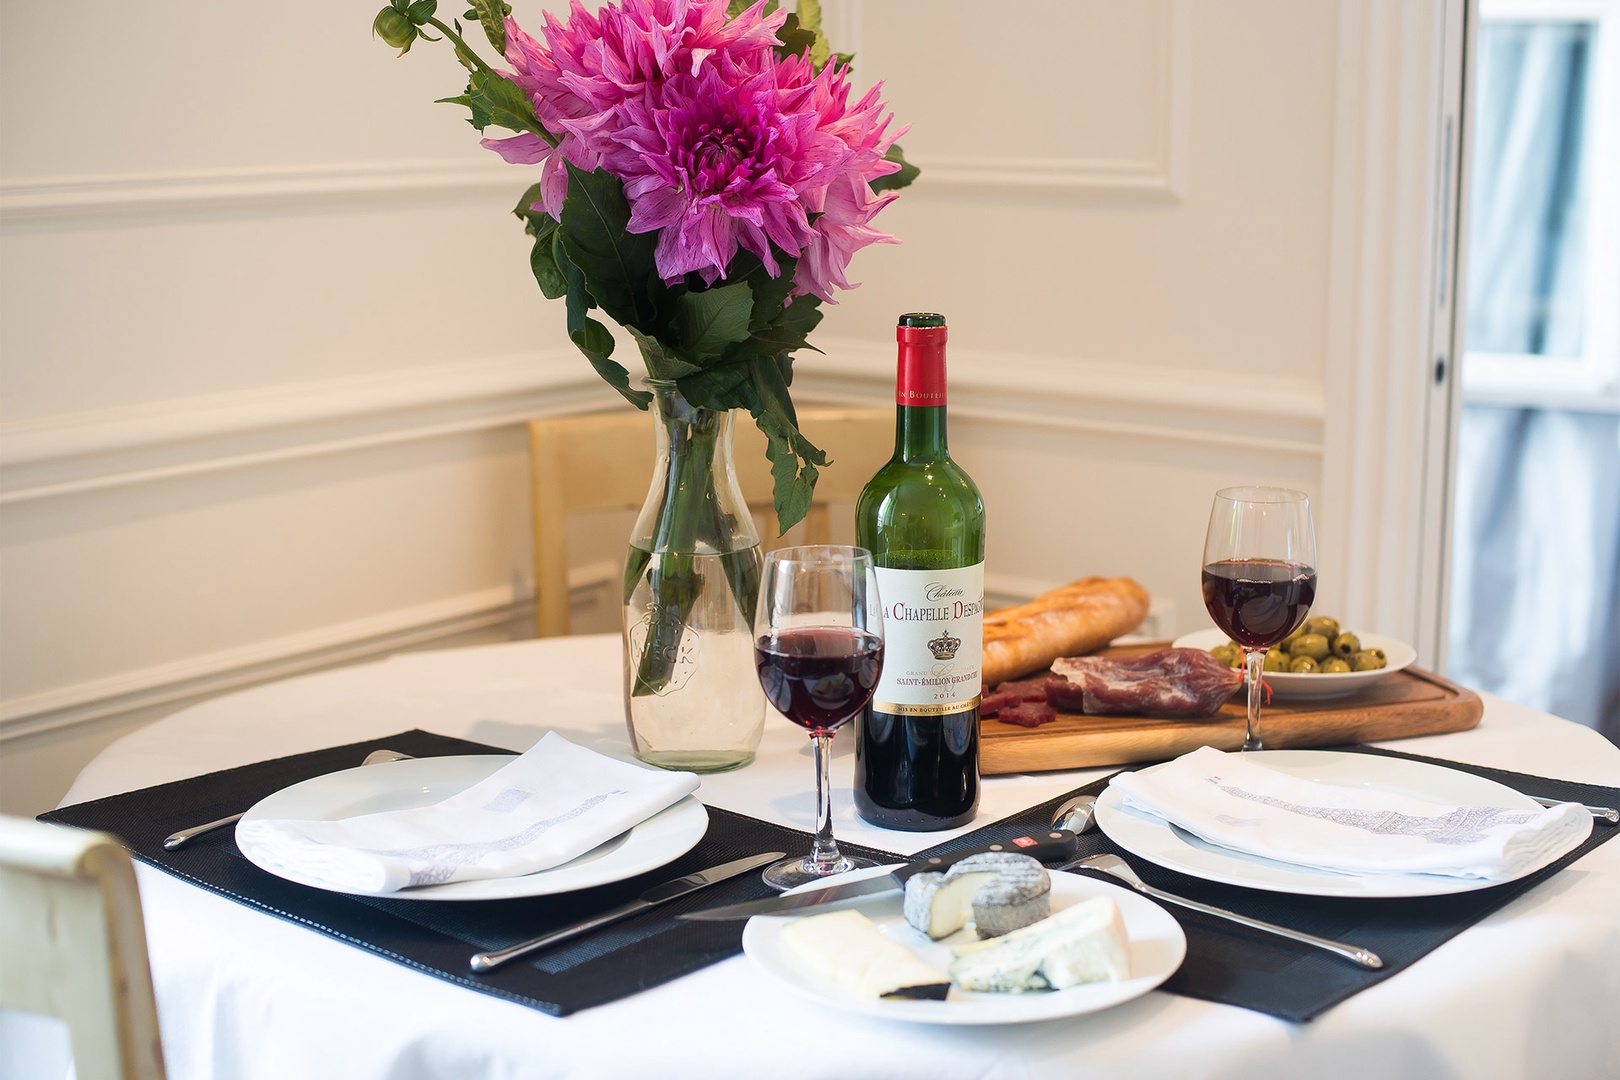 Treat your special someone to a romantic French dinner at home.